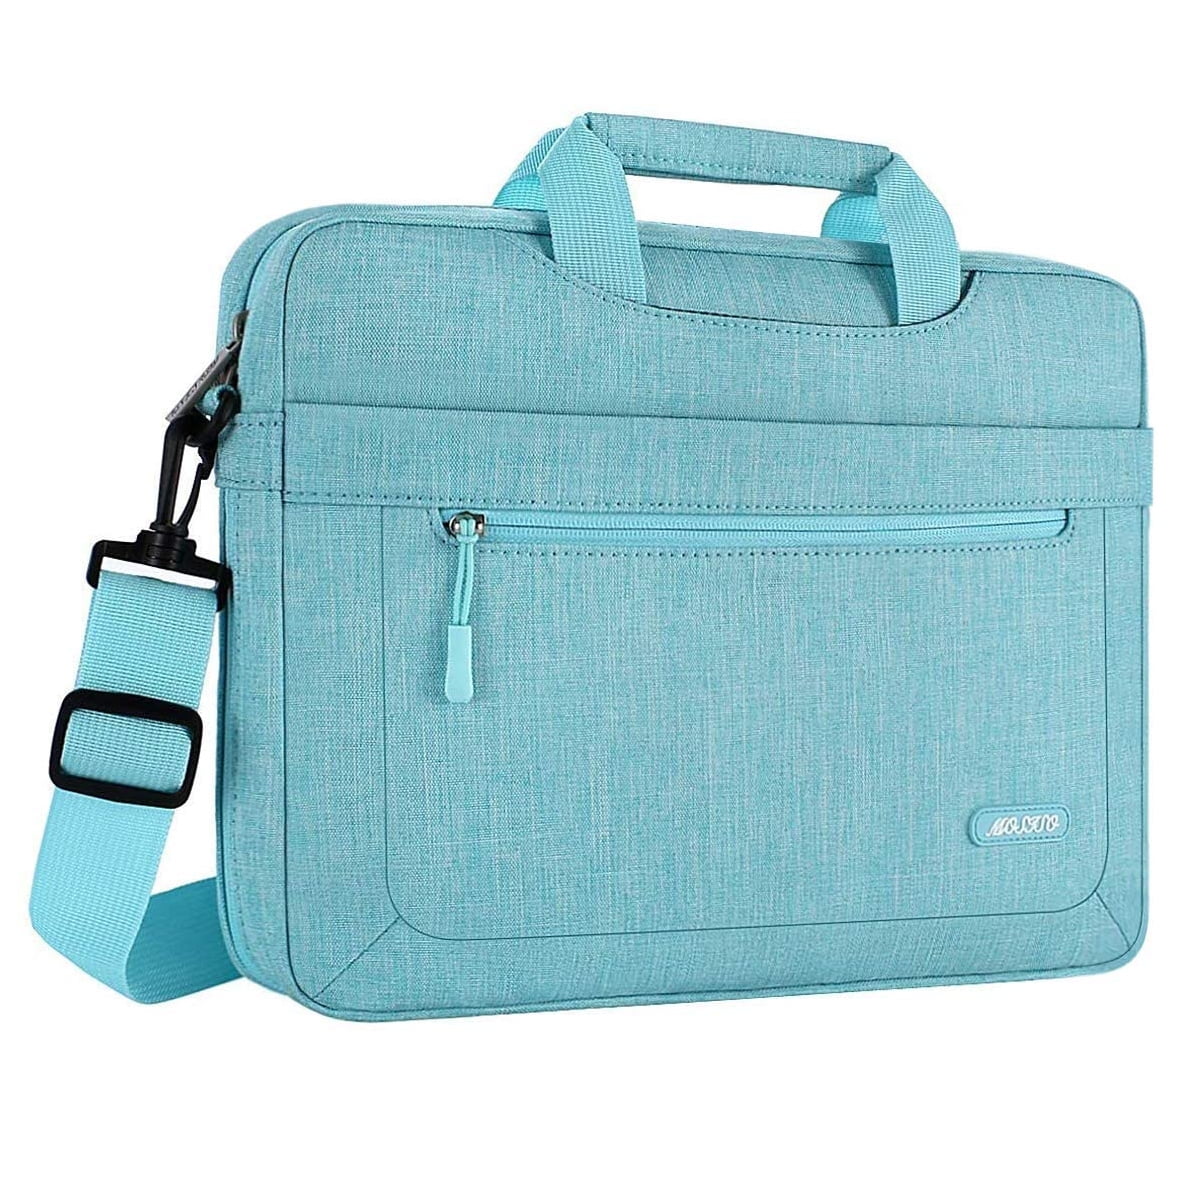 MacBook Pro MOSISO Laptop Briefcase Handbag Compatible 13-13.3 Inch MacBook Air Sky Blue Notebook Computer Polyester Multifunctional Carrying Sleeve Case Cover Bag 